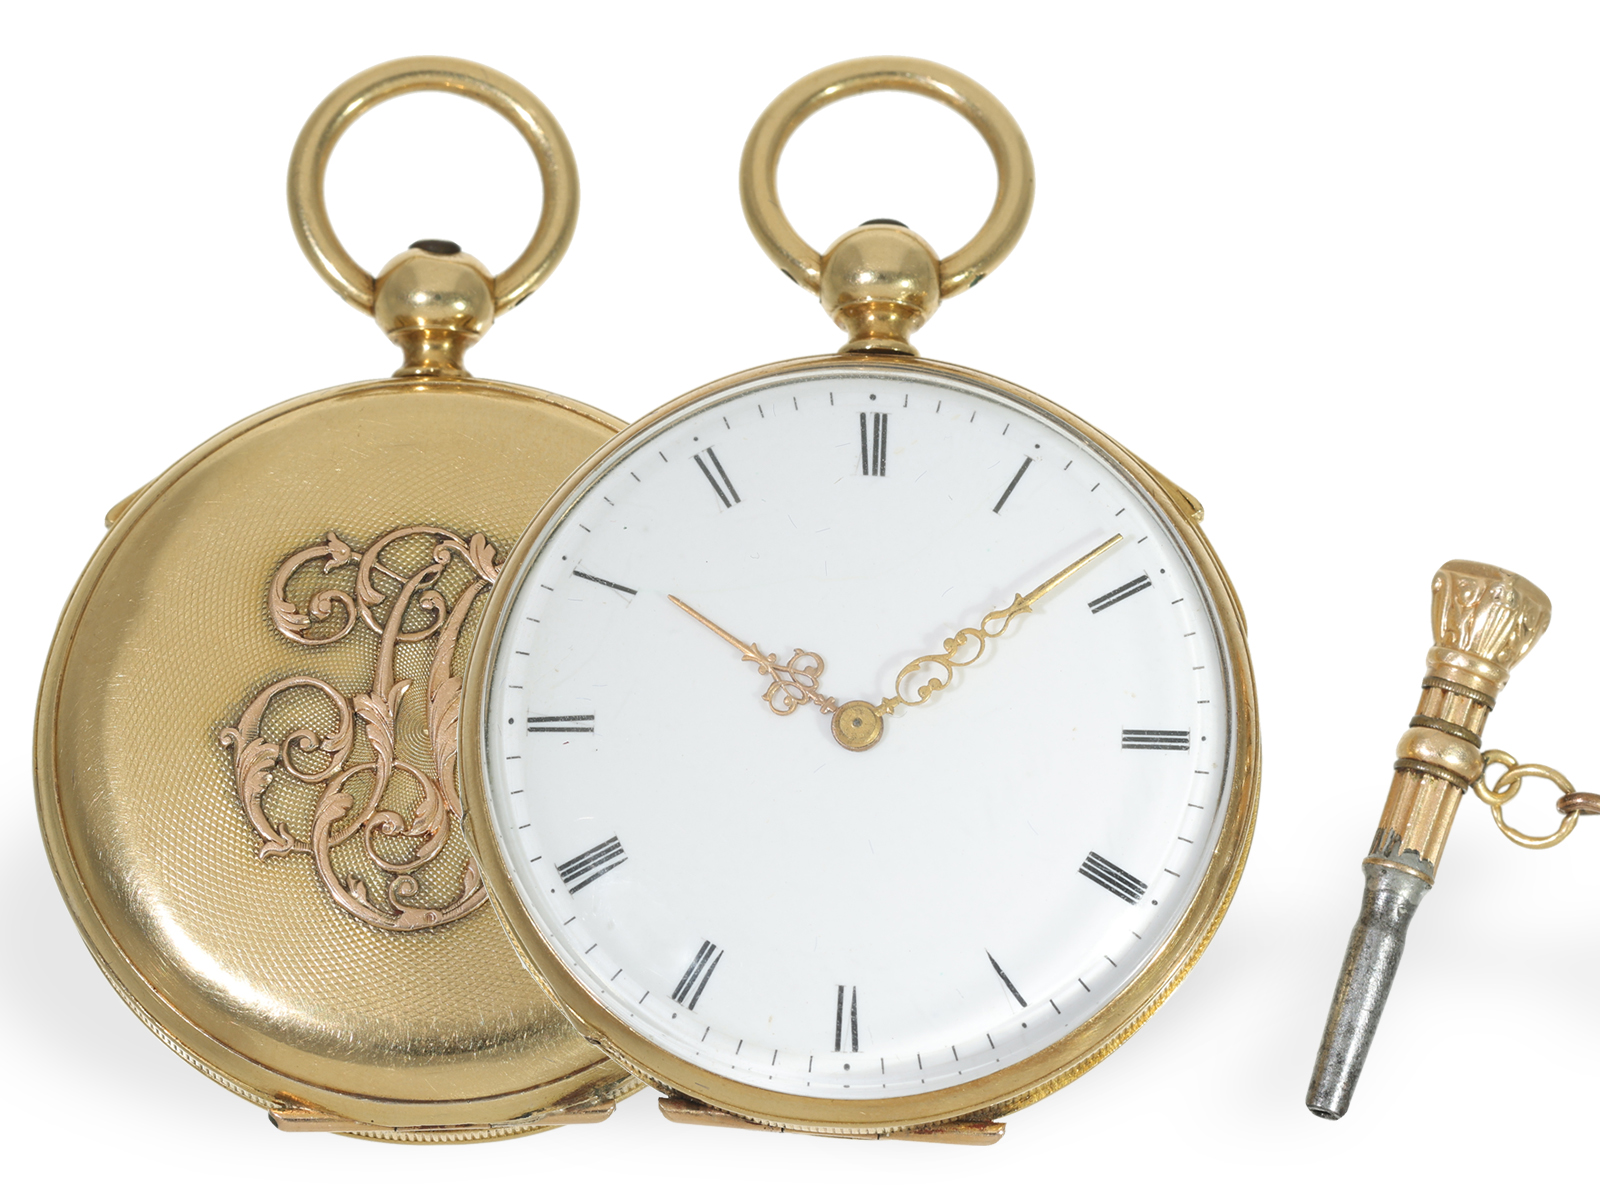 Pocket watch: very rare ladies' pocket watch with repeater, Jeannot Droz a Besancon ca. 1850